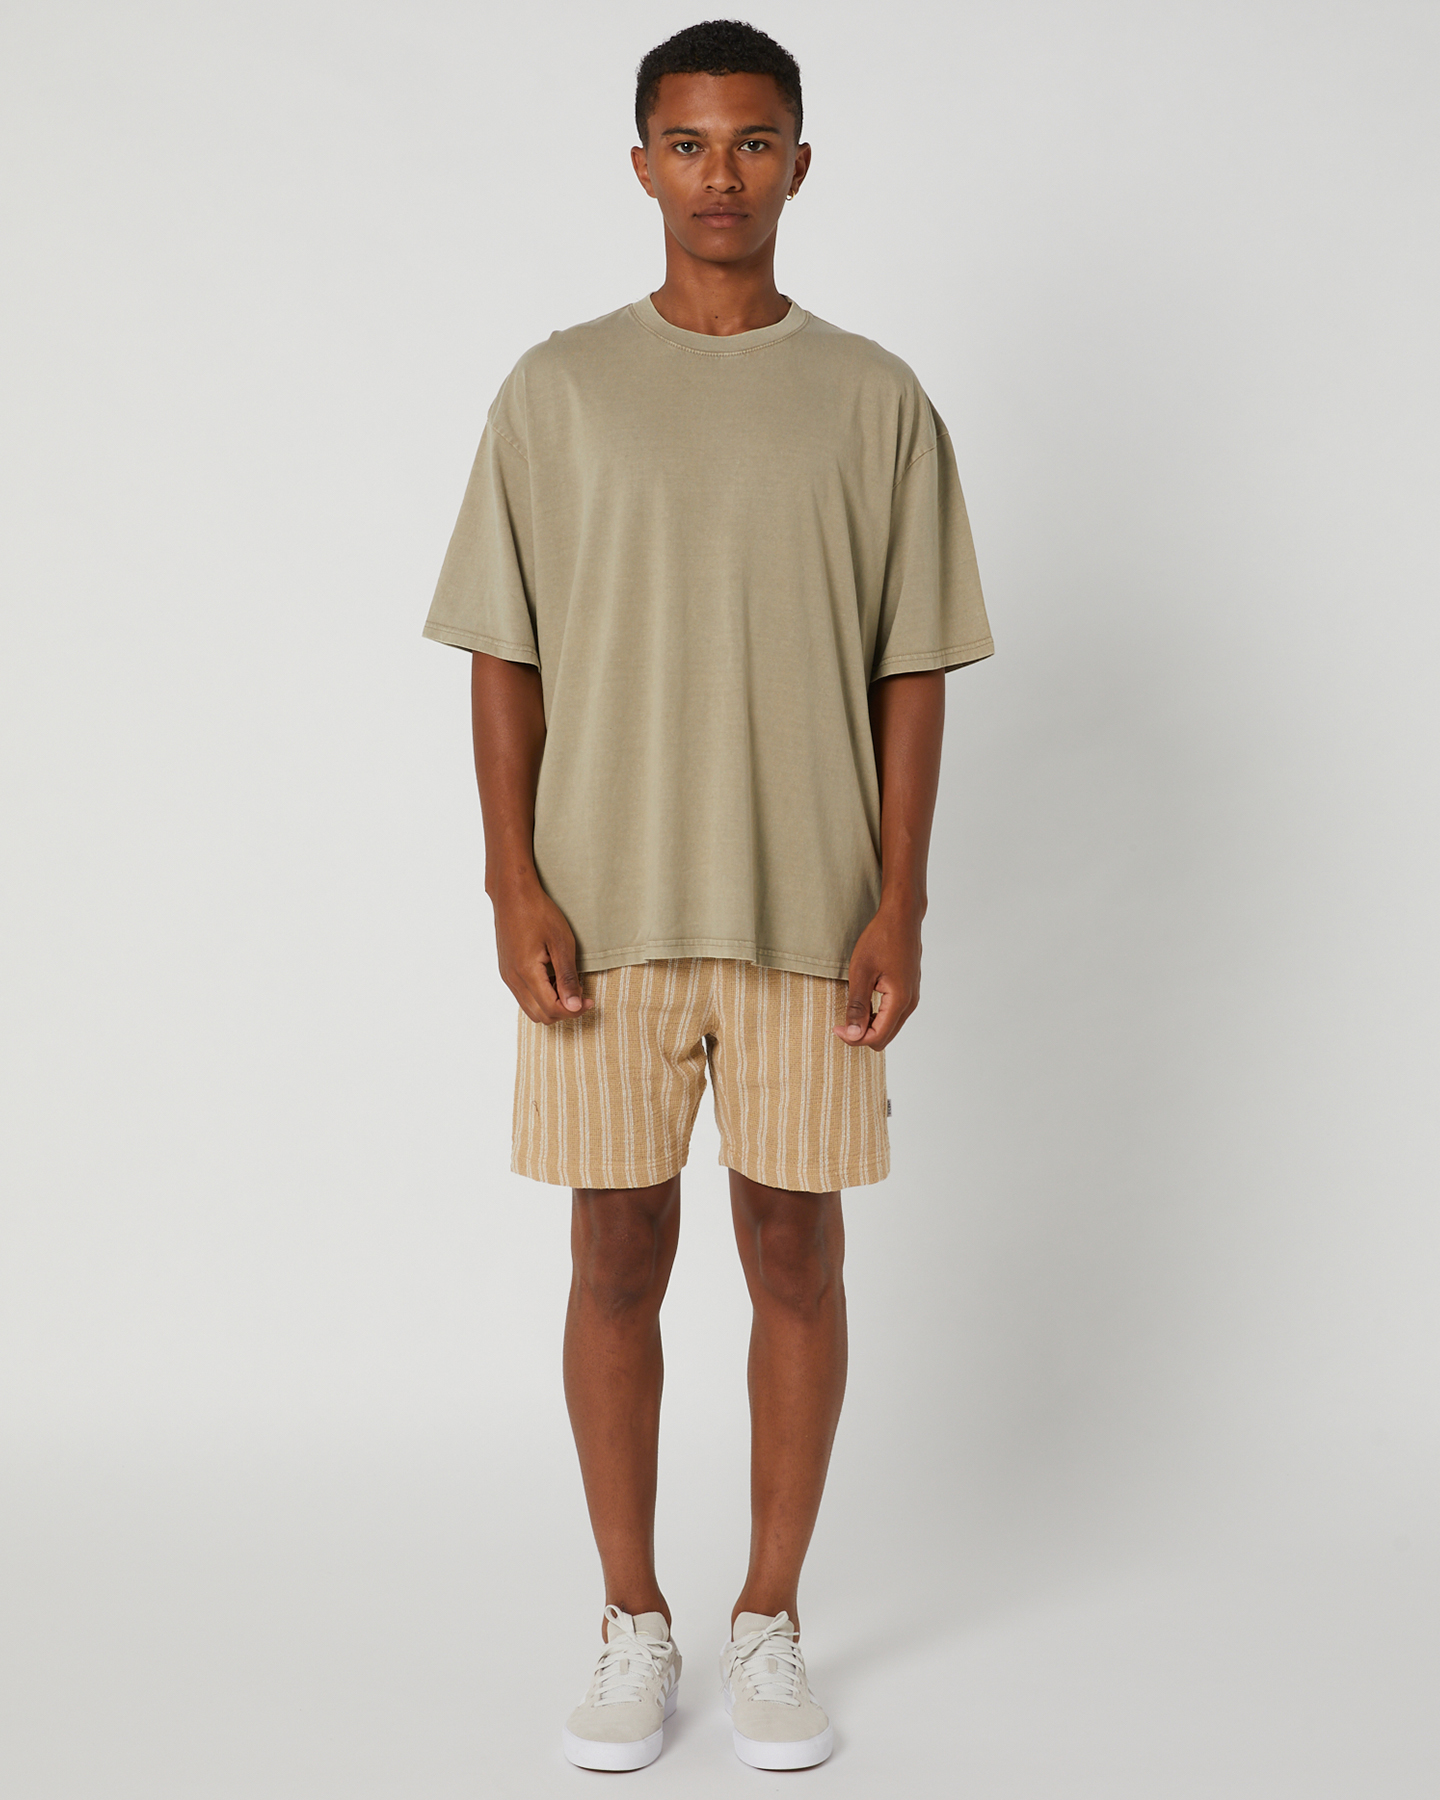 Silent Theory Oversized Tee - Tan | SurfStitch